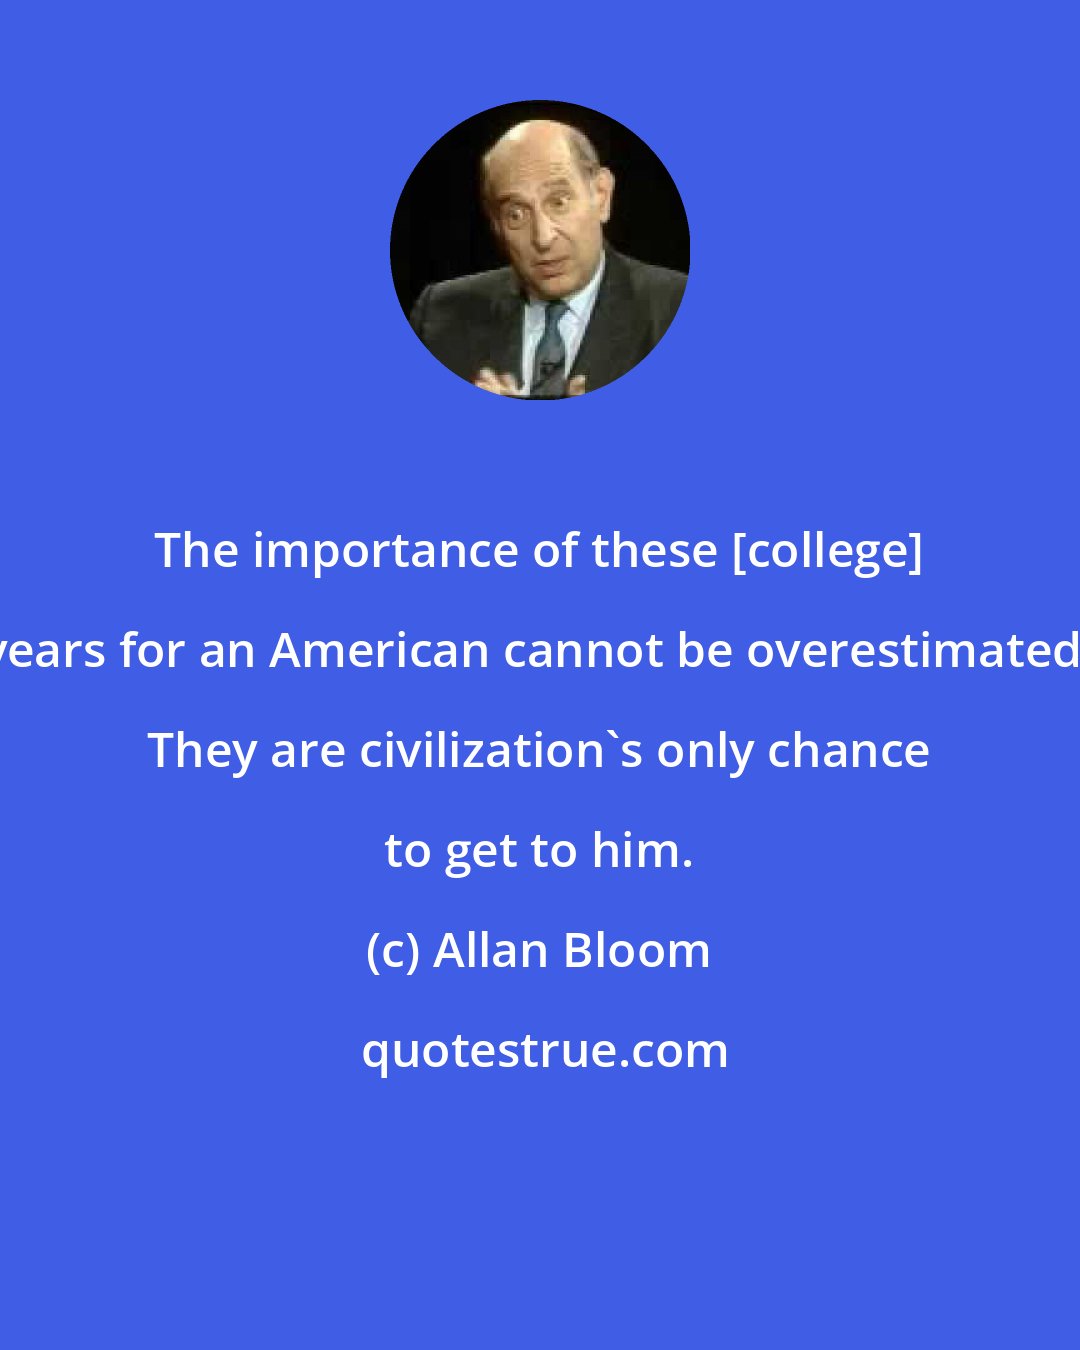 Allan Bloom: The importance of these [college] years for an American cannot be overestimated. They are civilization's only chance to get to him.